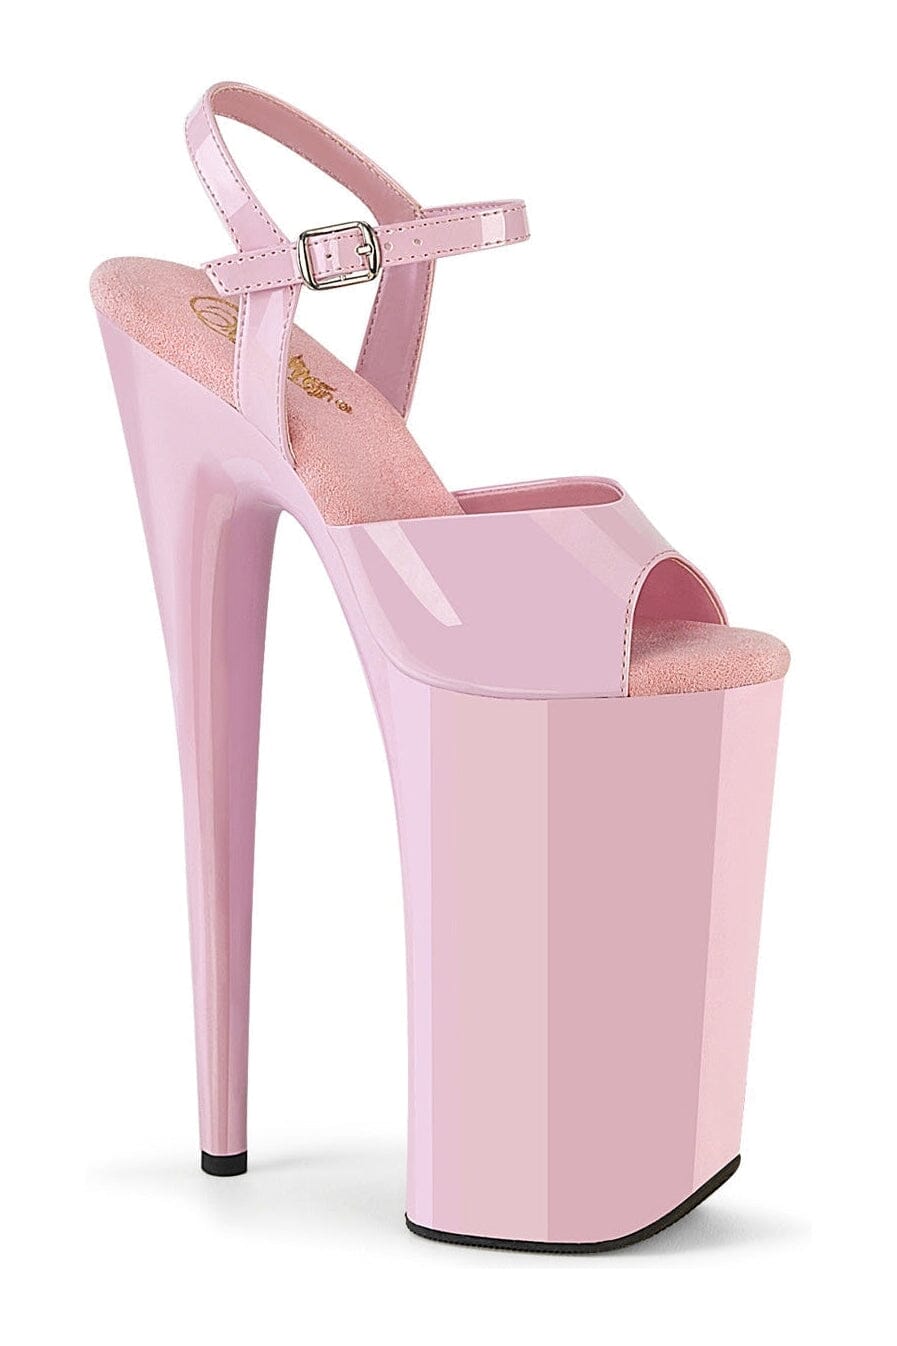 BEYOND-009 Pink Patent Sandal-Sandals-Pleaser-Pink-10-Patent-SEXYSHOES.COM